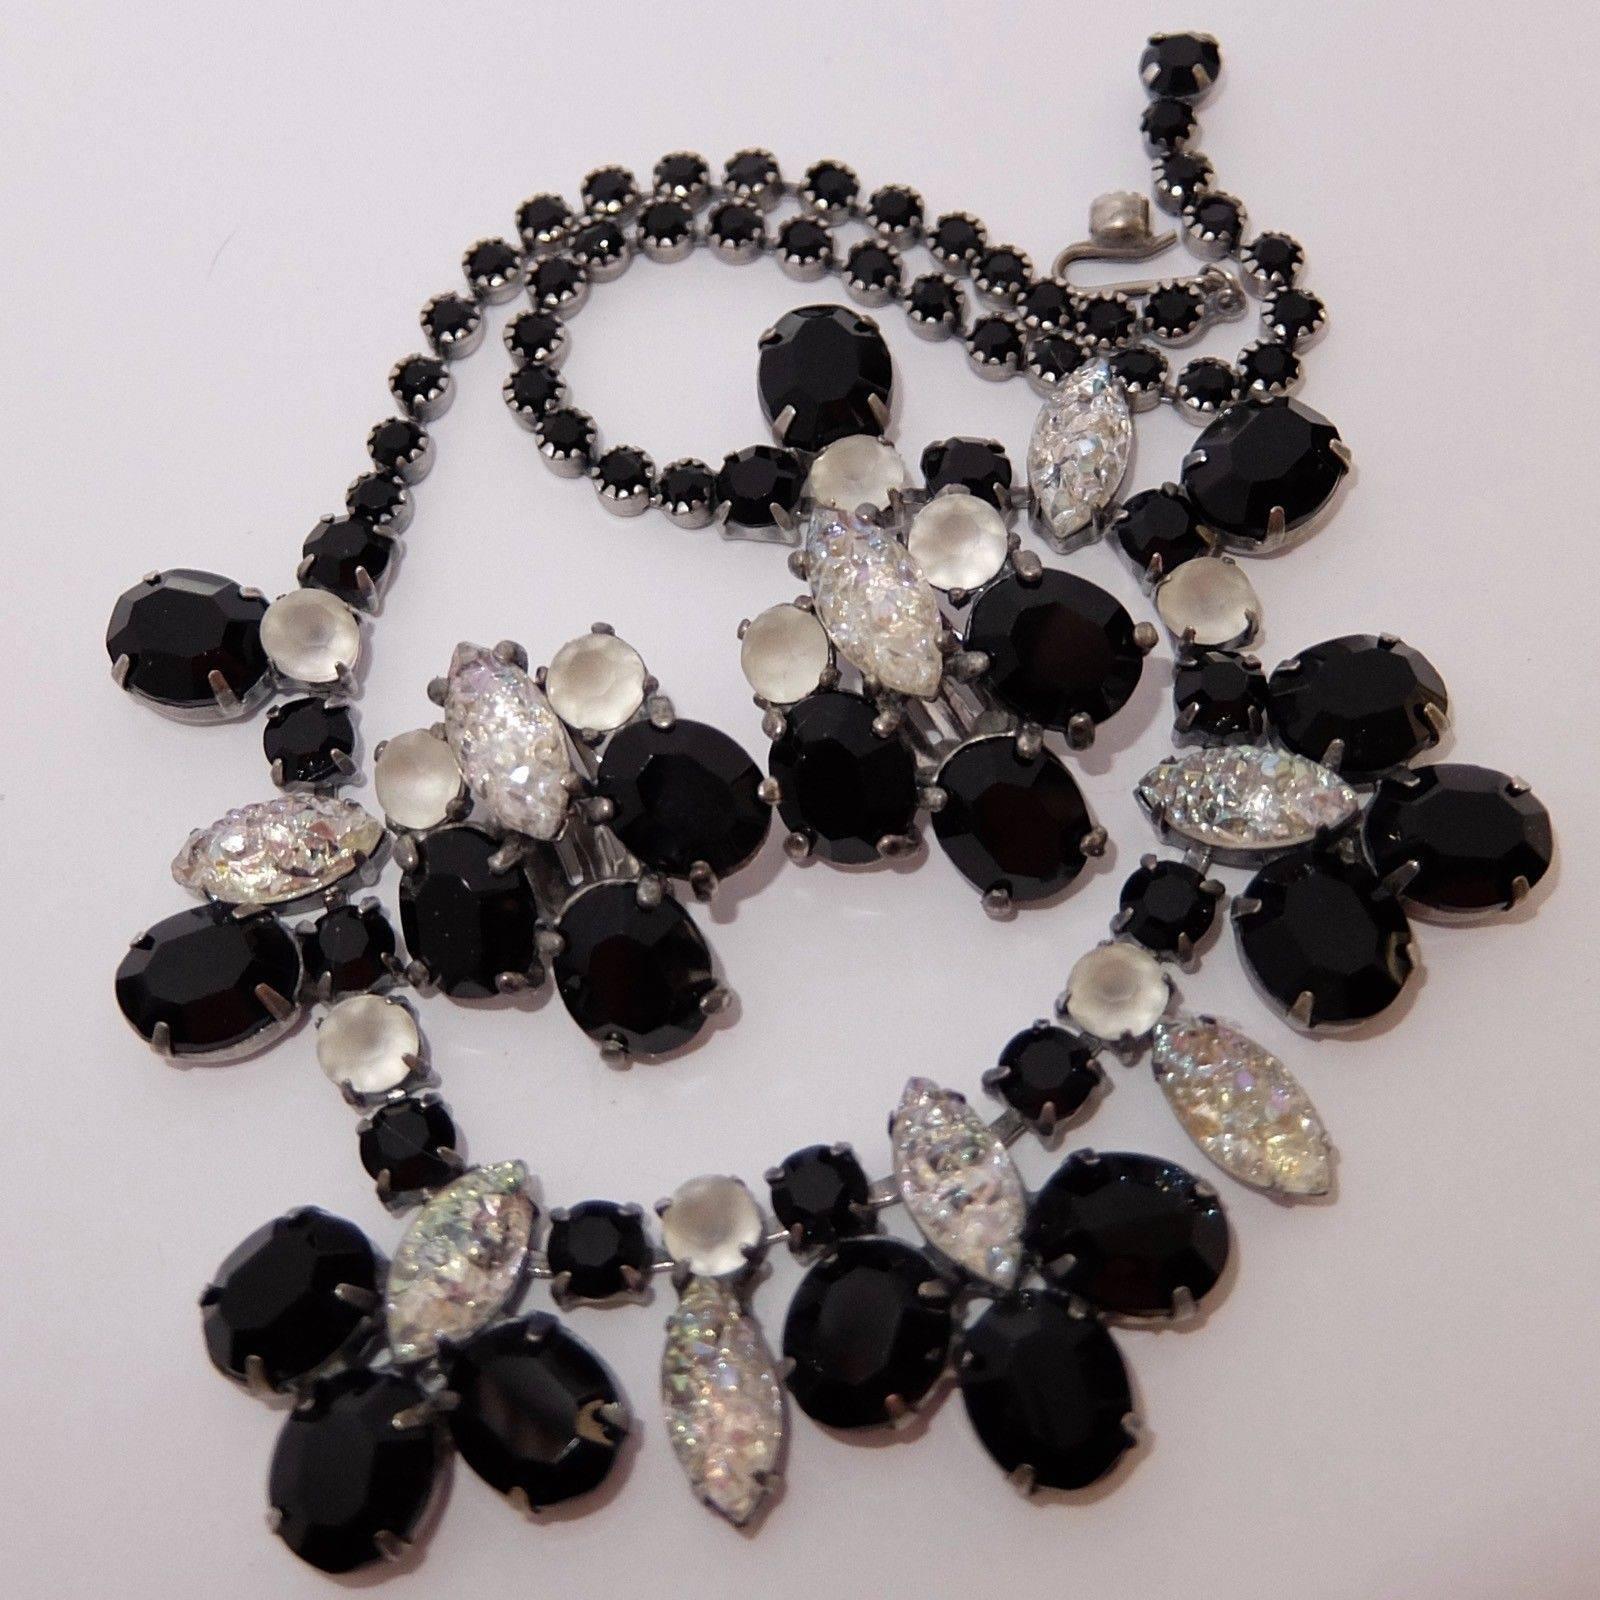 Beautiful signed Schiaparelli Runway Necklace featuring Black Crystal Faux Diamond enhanced with iridescent Lava Rock Art Glass stones; Silver Tone; circa 1950s-1960s; approx. size: 16.5” Long x 1” wide. Classic and Chic…illuminating your look with